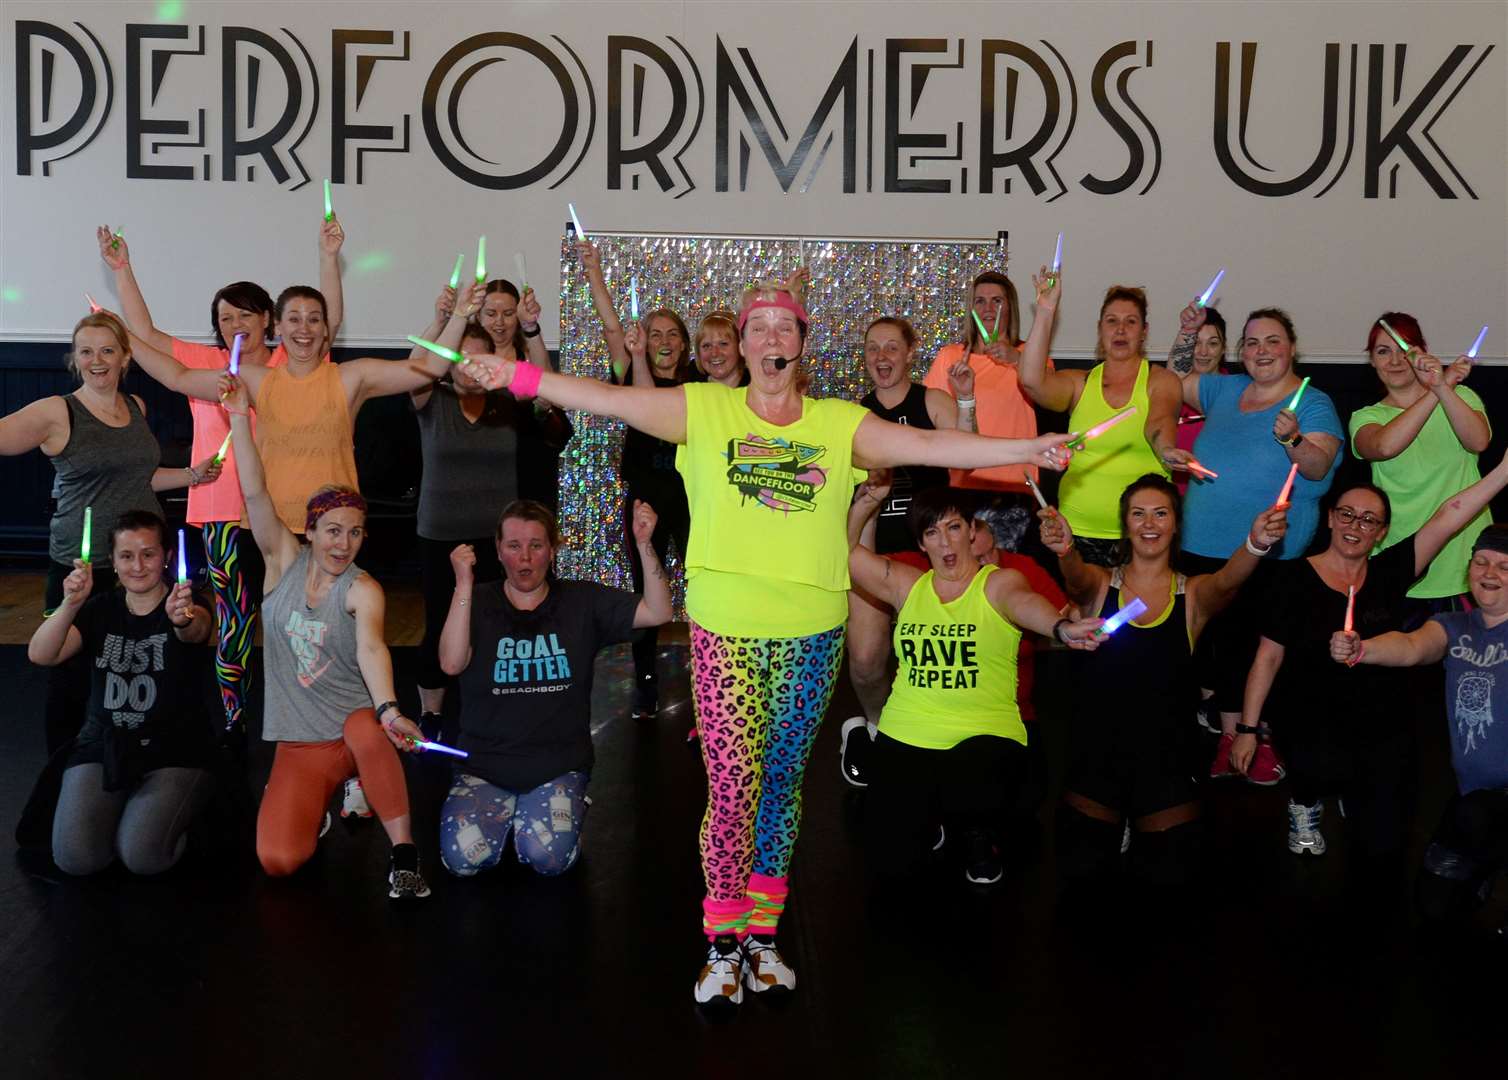 New Clubbercise group at Perfomers Uk.Fitness coach Louize Racklin are looking for more eople to try Clubbercise.Picture Gary Anthony.